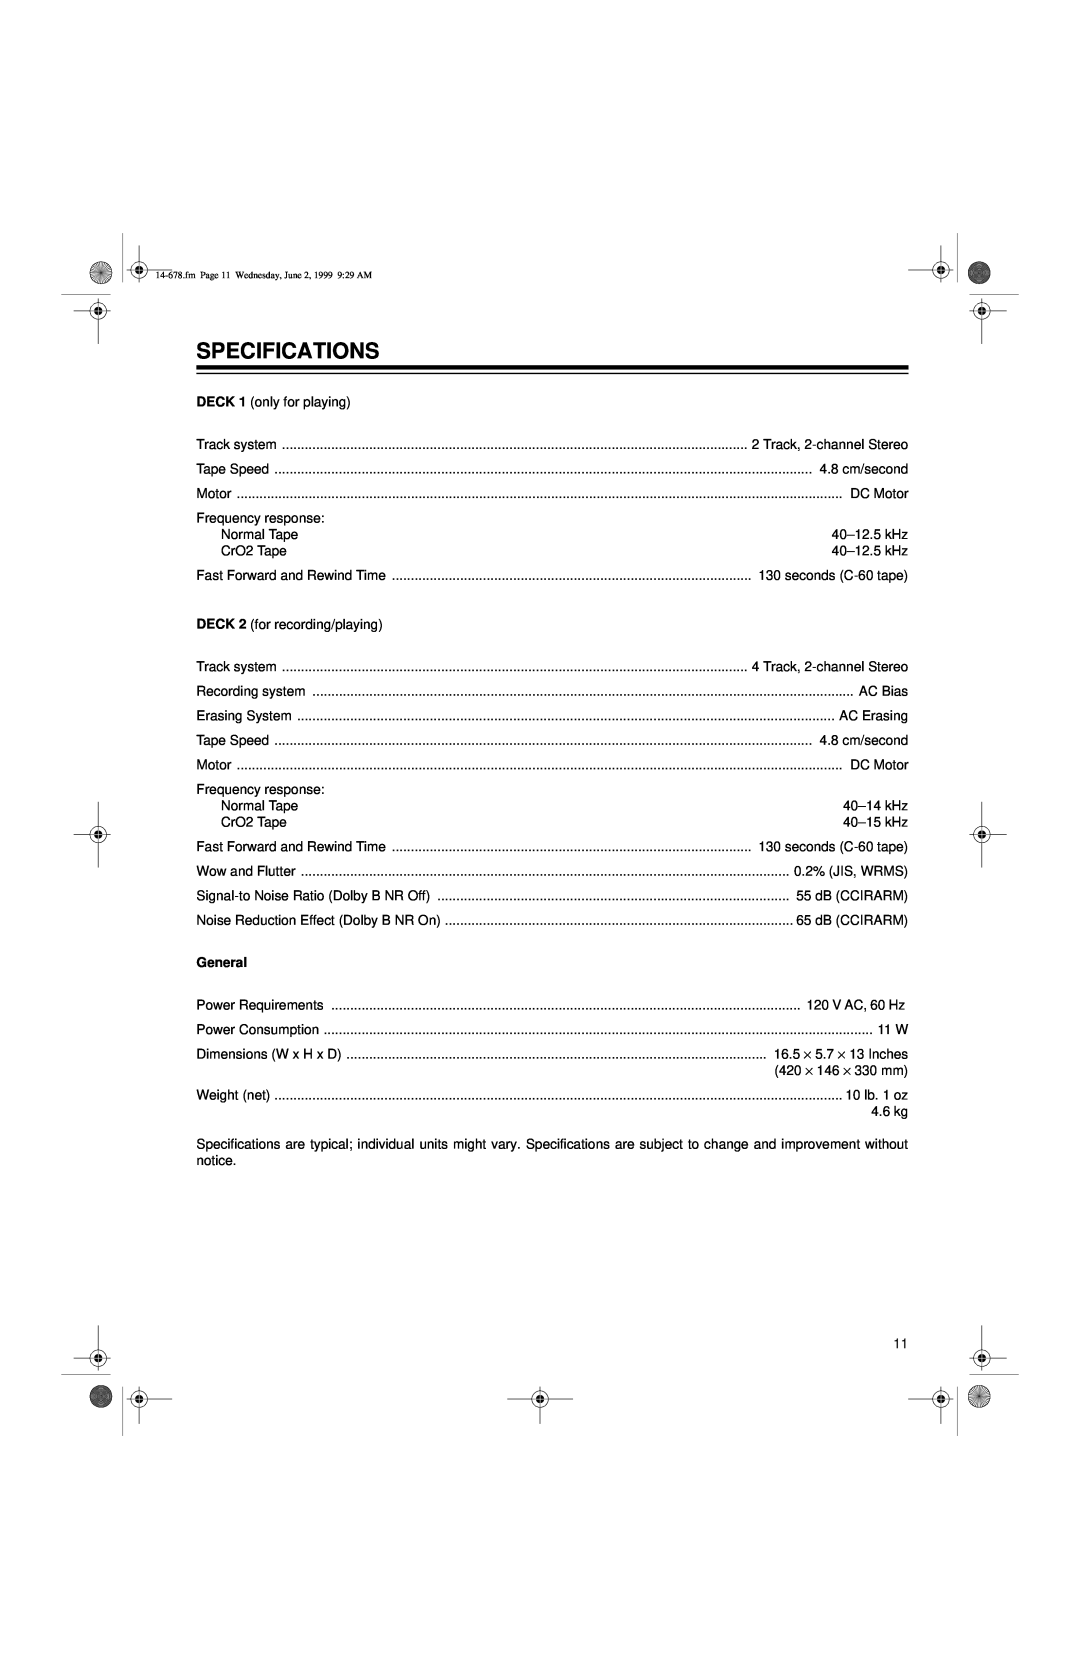 Optimus - Katadyn Products Inc SCT-540 owner manual Specifications, General 